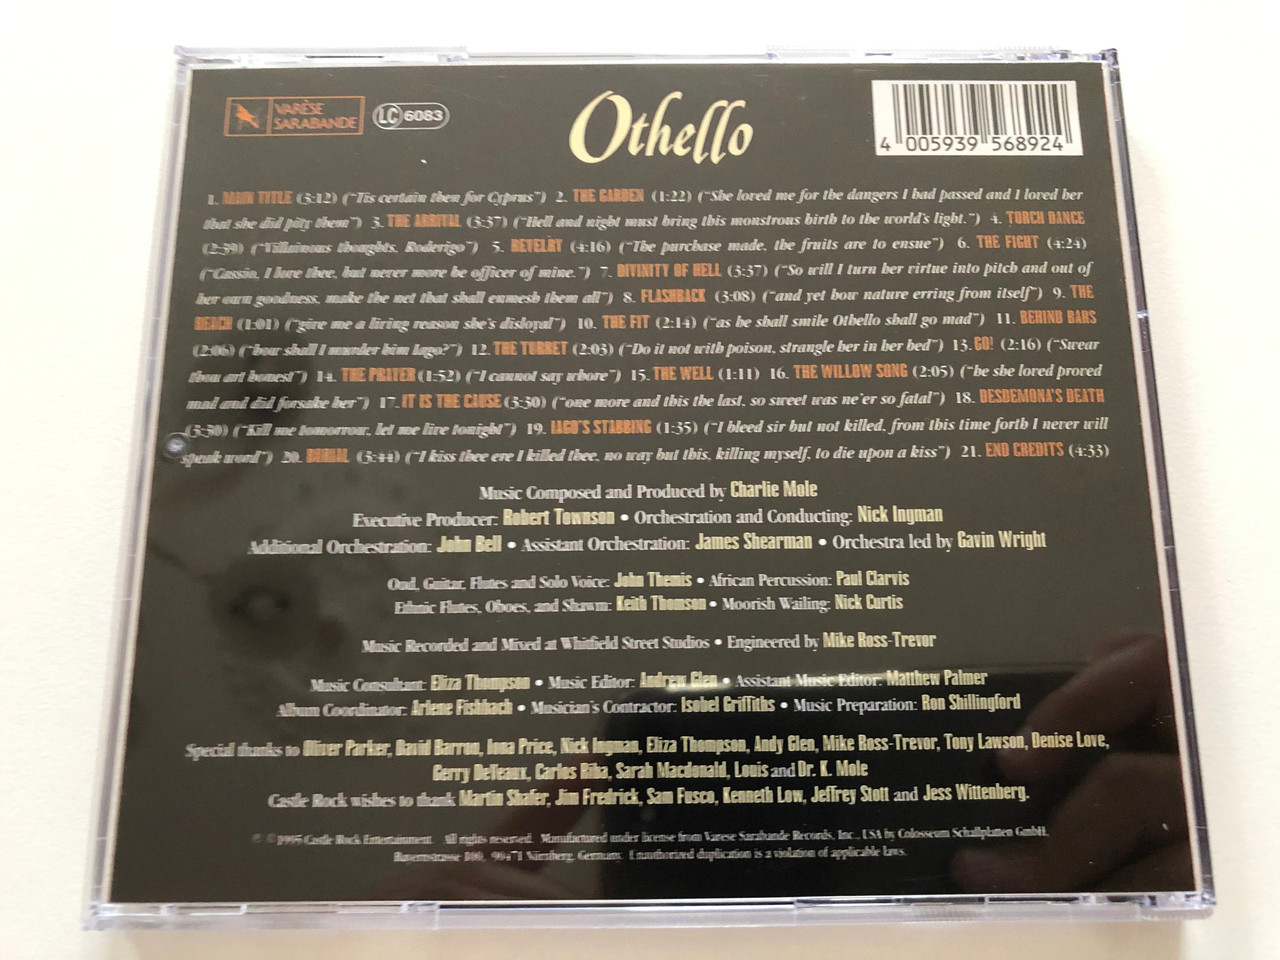 https://cdn10.bigcommerce.com/s-62bdpkt7pb/products/31179/images/183547/Othello_Original_Motion_Picture_Soundtrack_-_Music_composed_by_Charlie_Mole_Varse_Sarabande_Audio_CD_1995_VSD-5689_4__33476.1625598558.1280.1280.JPG?c=2